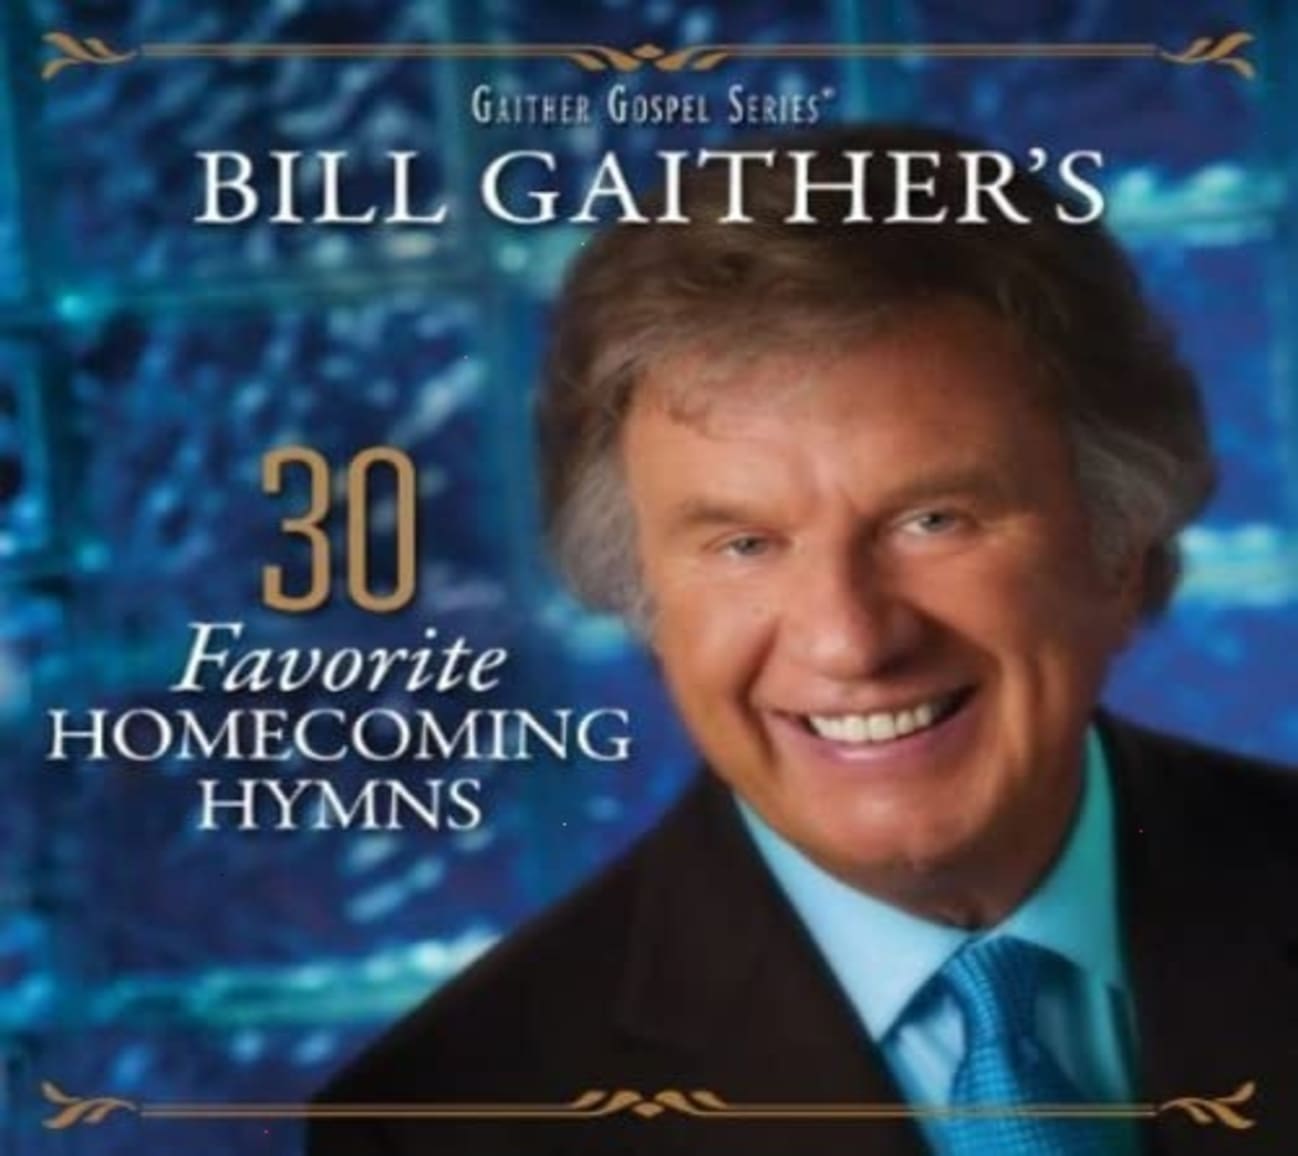 Bill Gaither’s 30 Favorite Homecoming Hymns (CD) on MovieShack